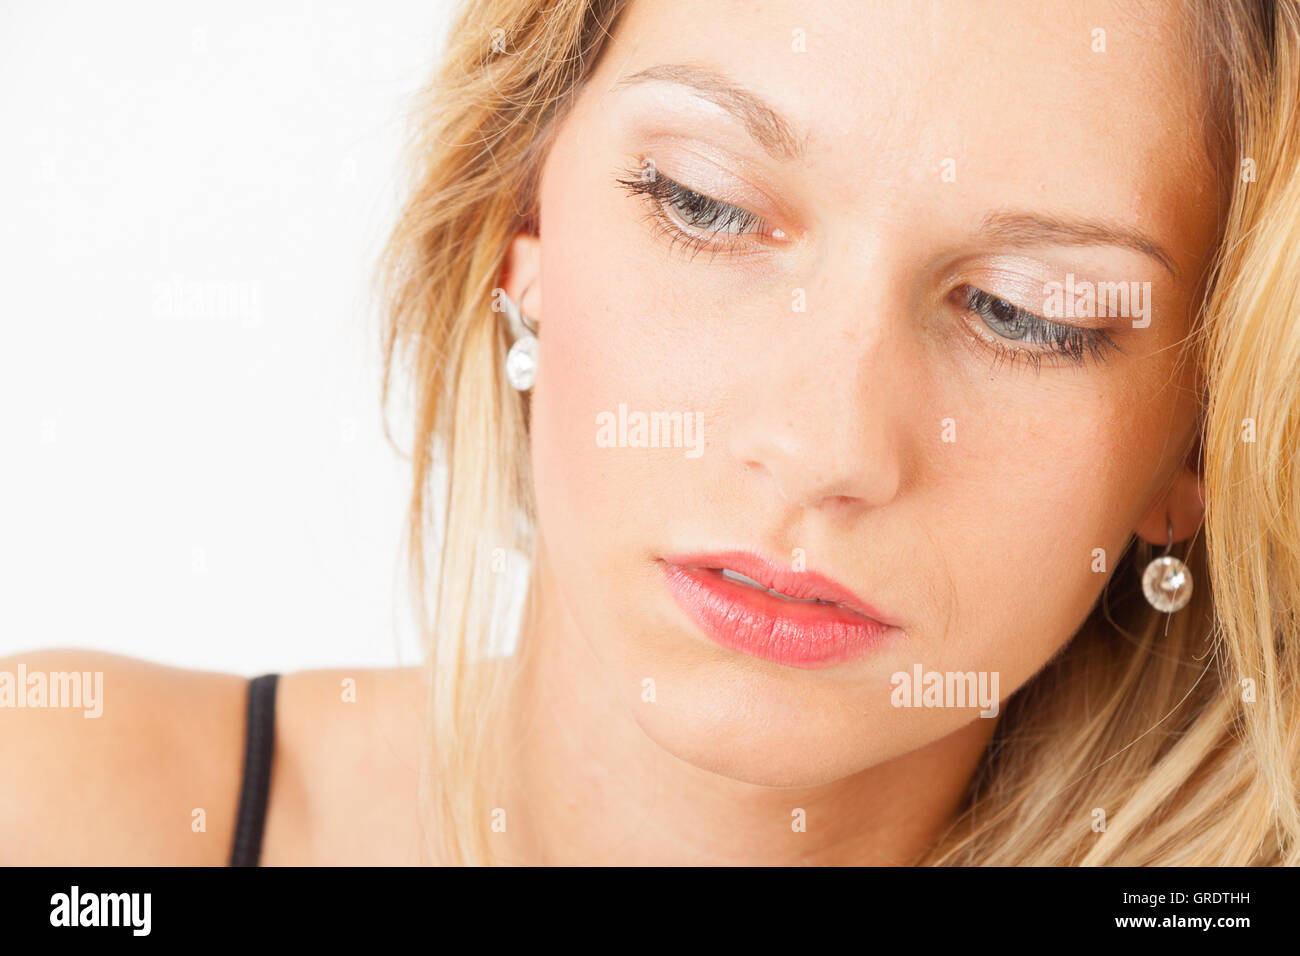 Young Woman With Makeup In Her Face Stock Photo